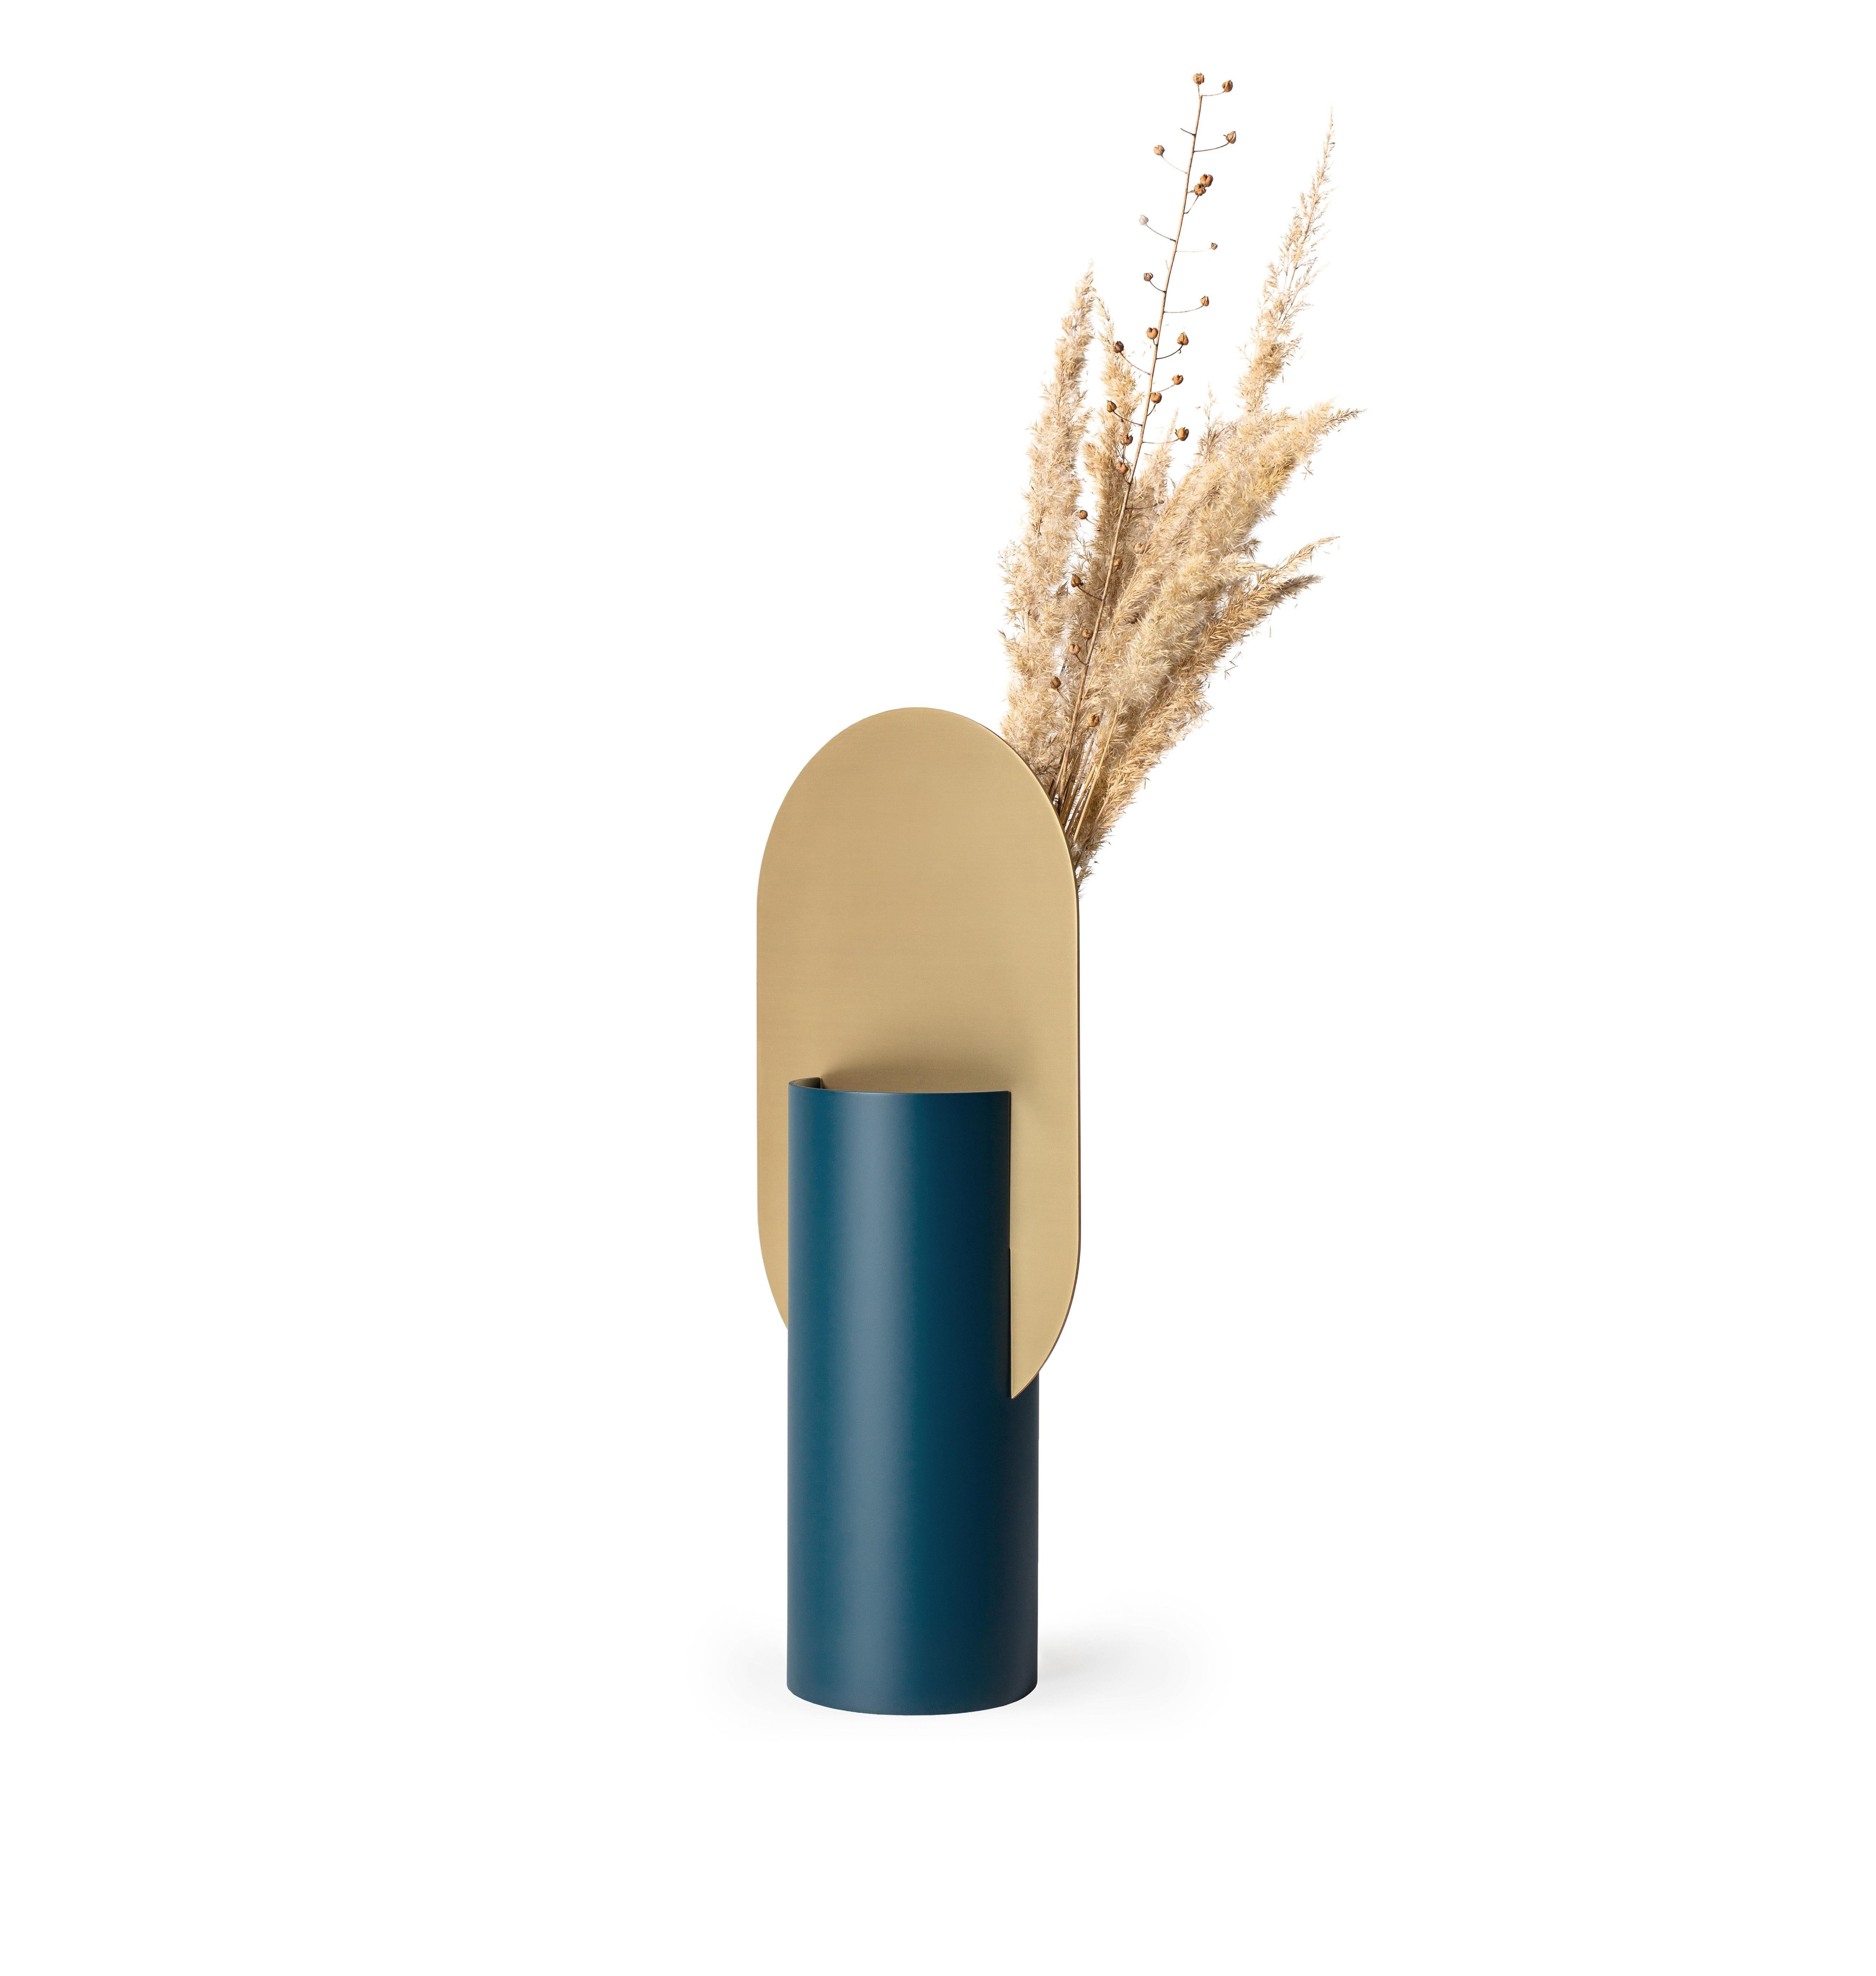 Organic Modern Contemporary Vase 'Genke CS3' by Noom in Brass and Steel For Sale